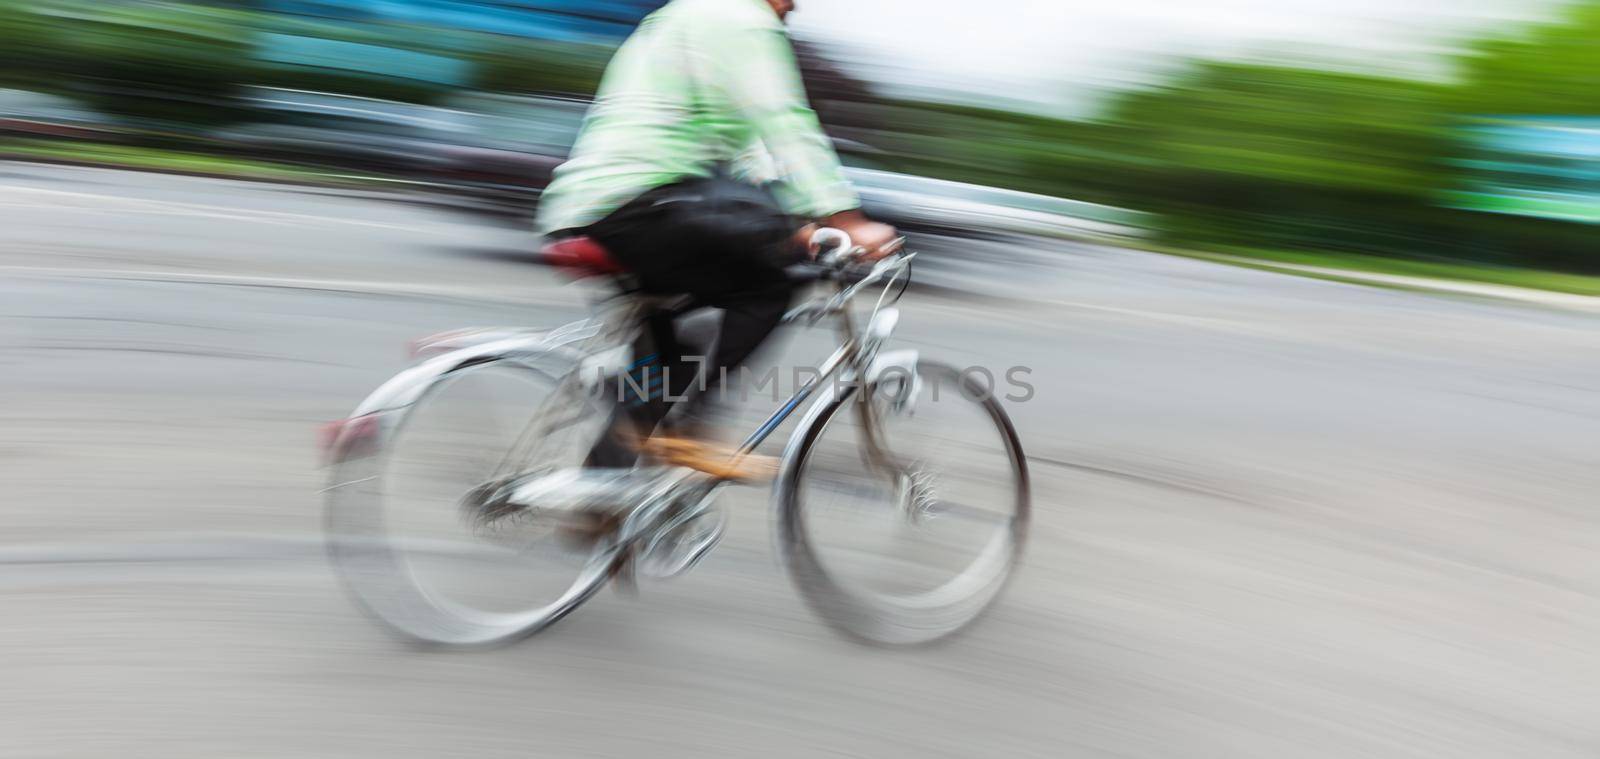 Abstract motion blur image of active people on bicycle in the city roadway